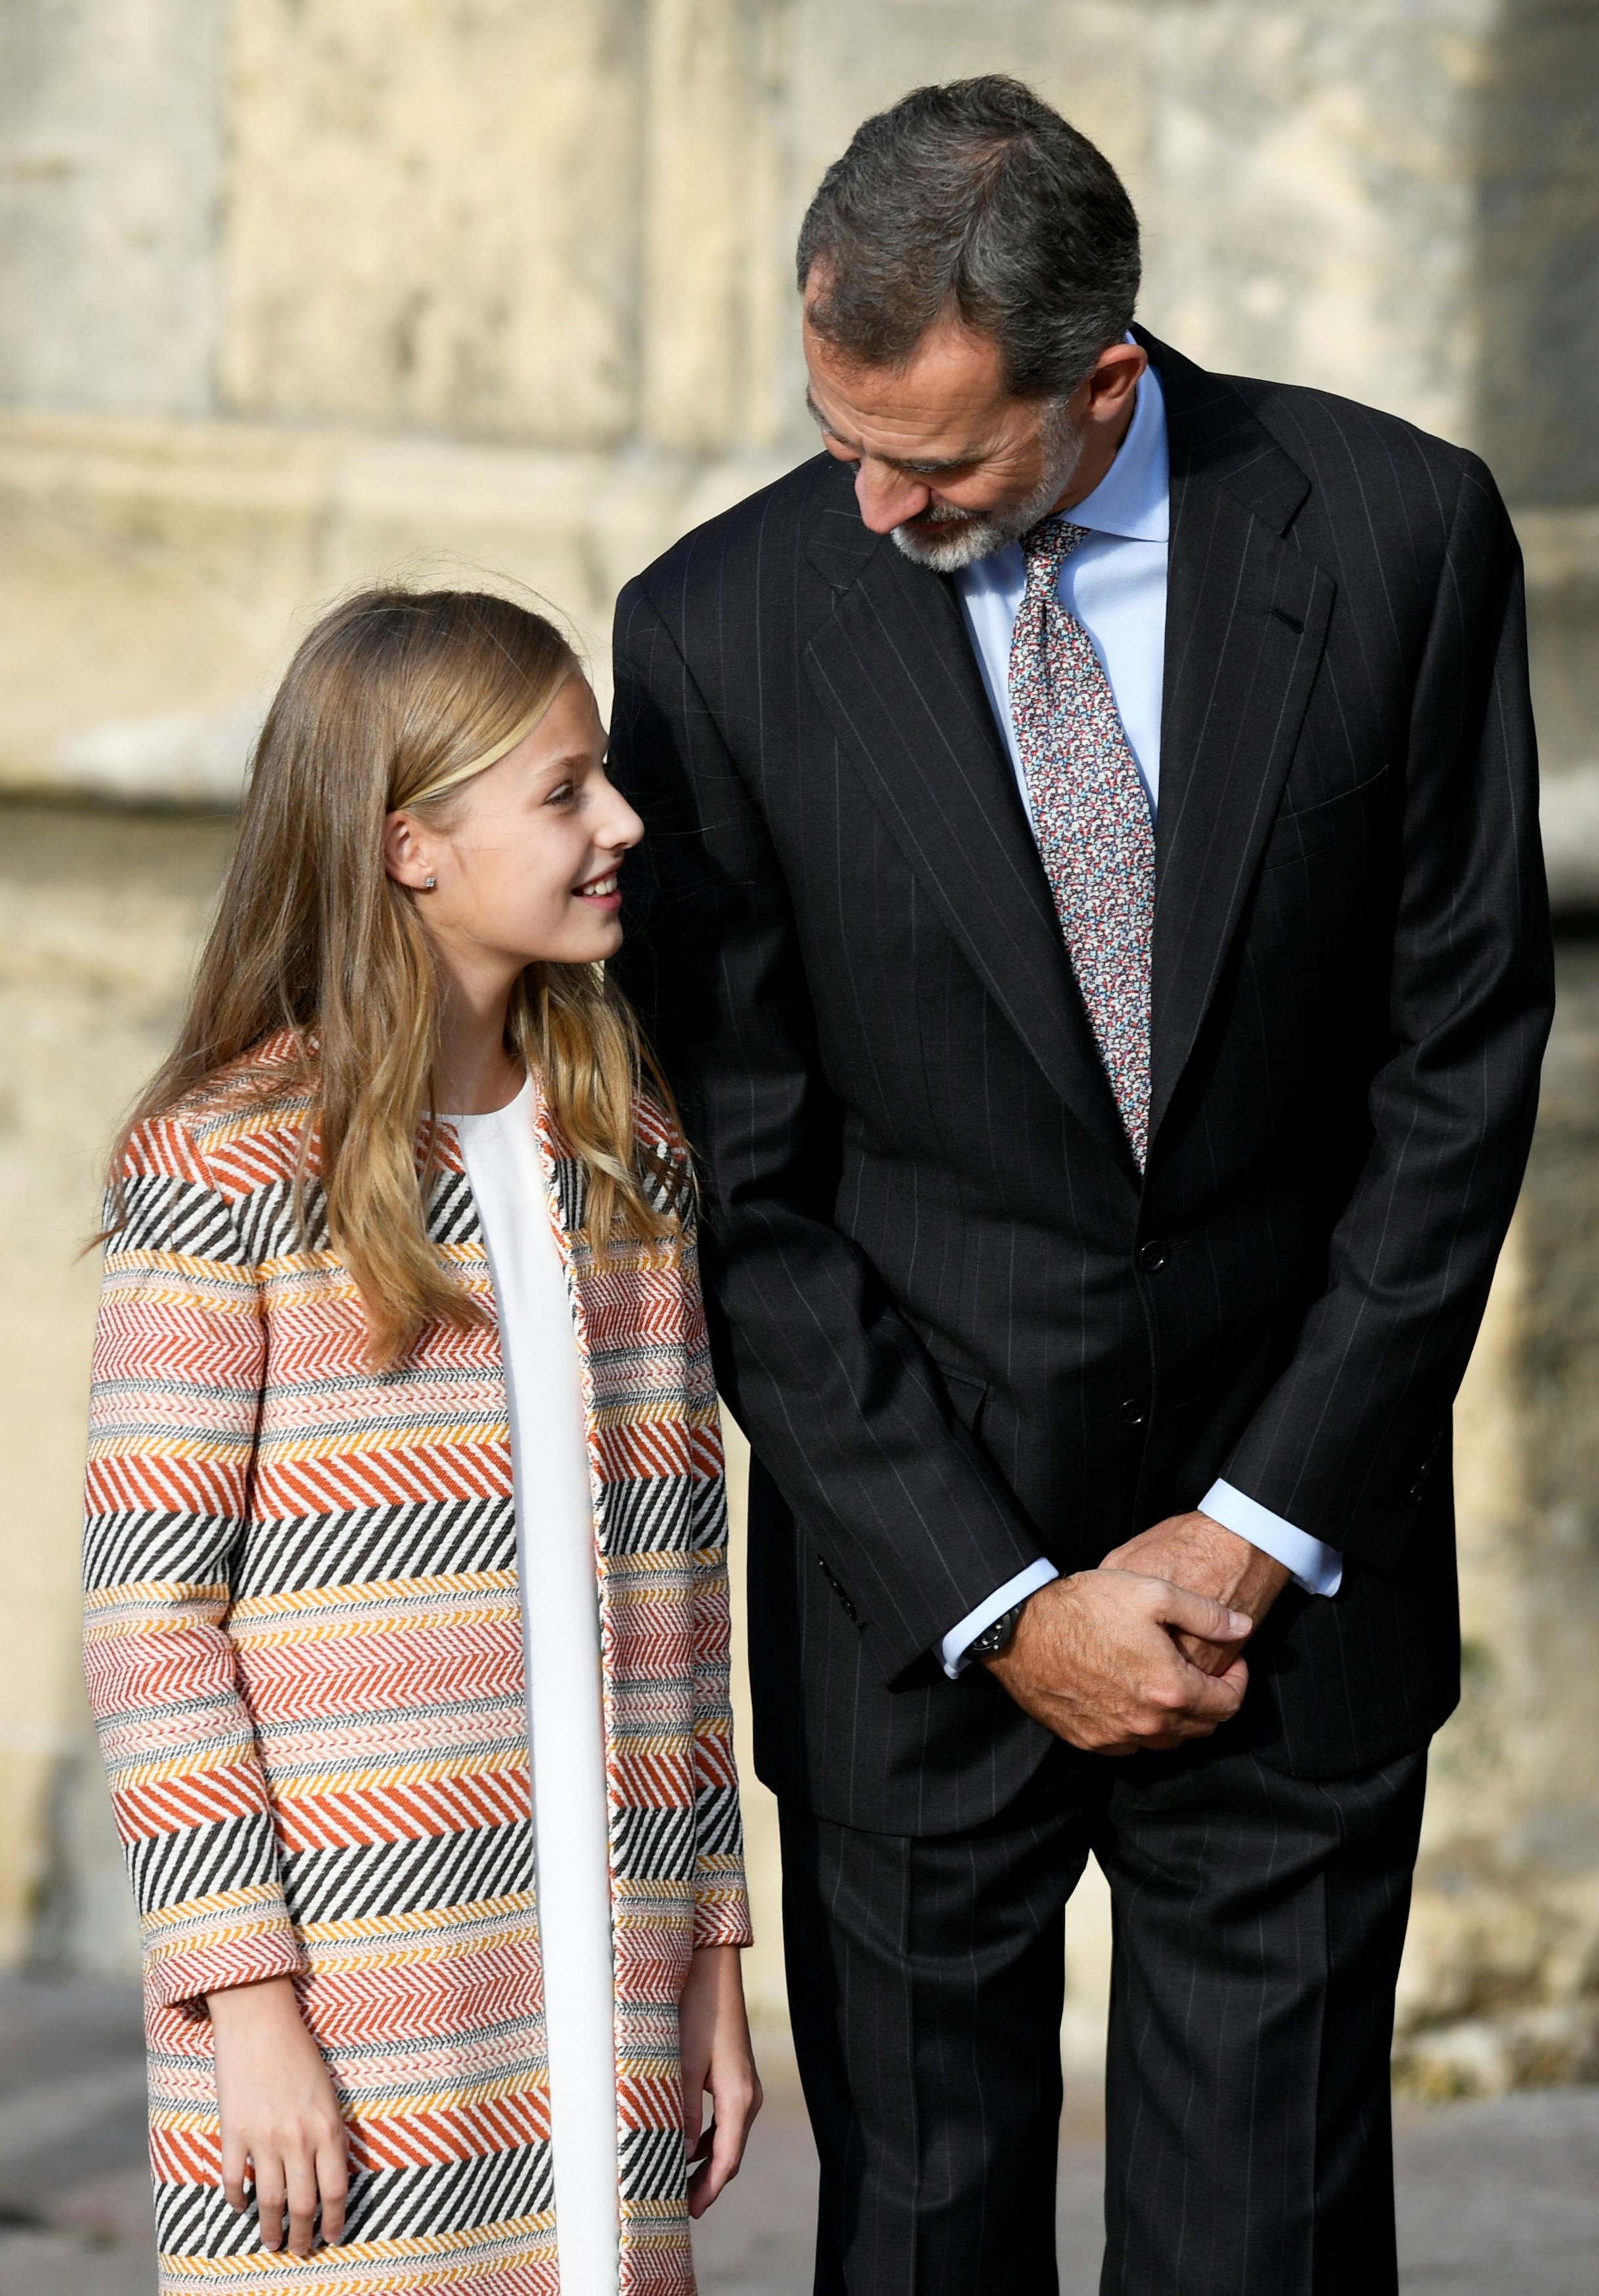 Spain's King Felipe and Princess Leonor along with Queen Letizia, and Princess Sofia (not pictured) visit the Cathedral in Oviedo, Spain, October 17, 2019. REUTERS/Eloy Alonso